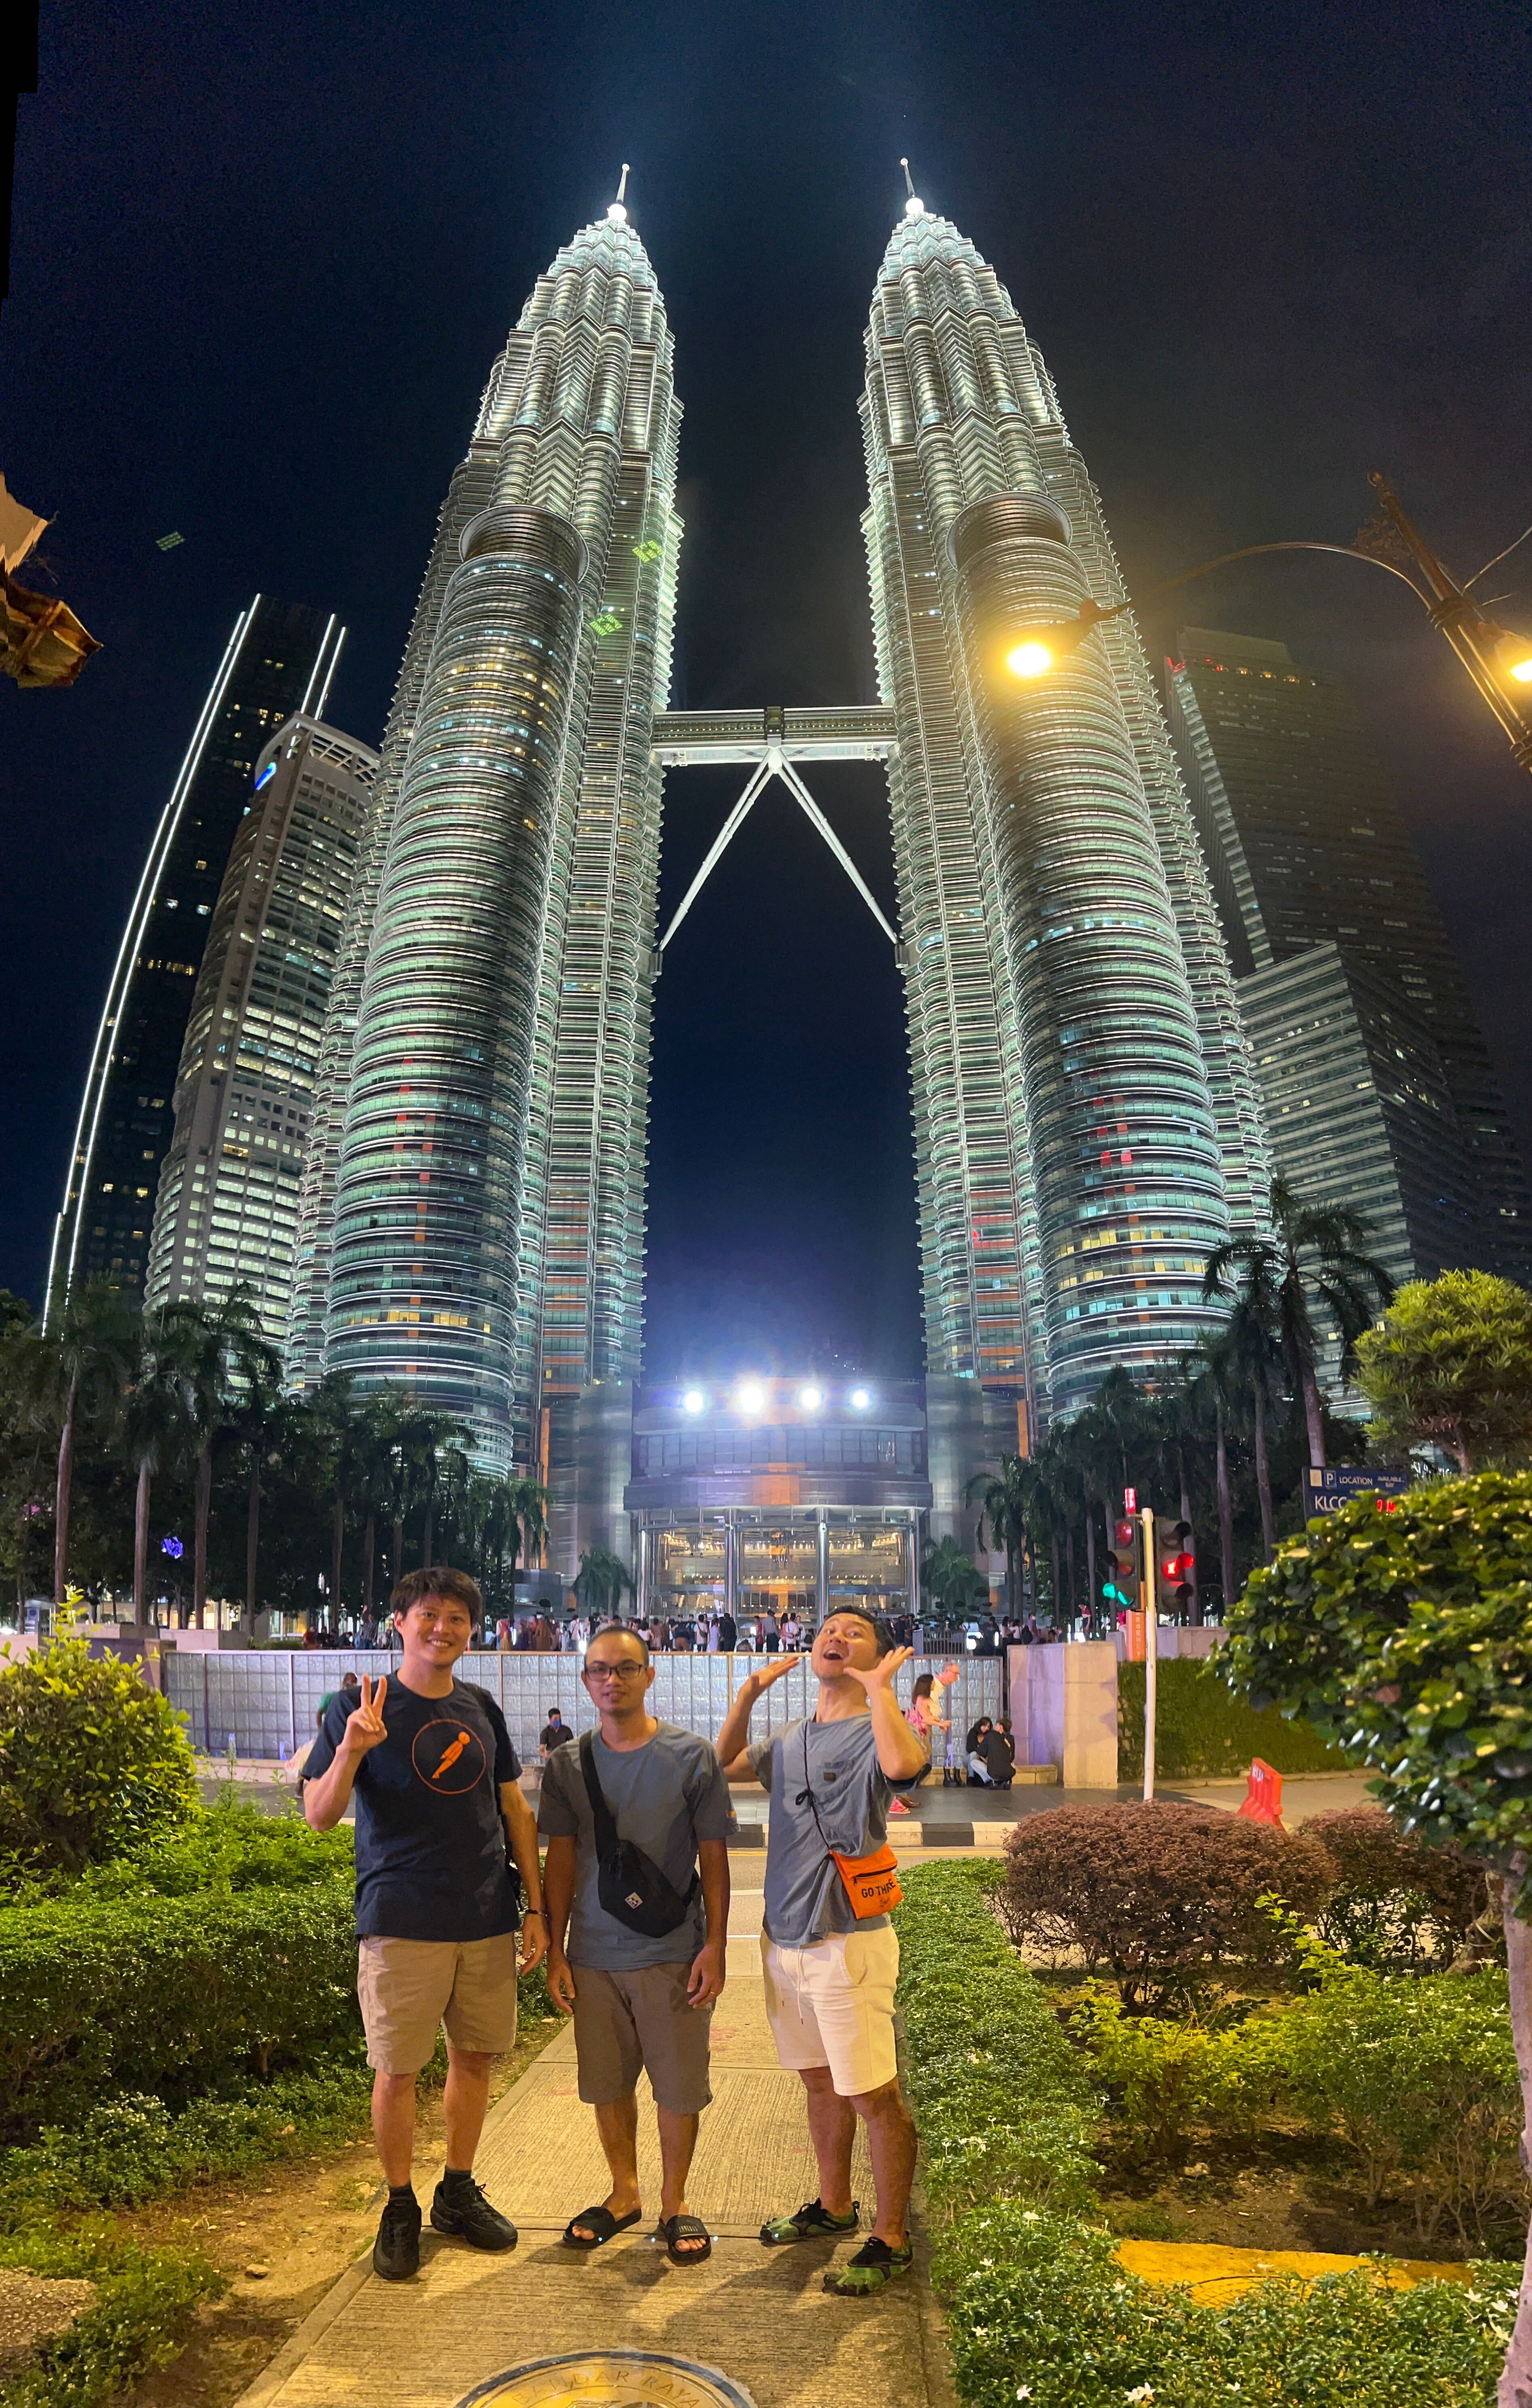 With KLCC